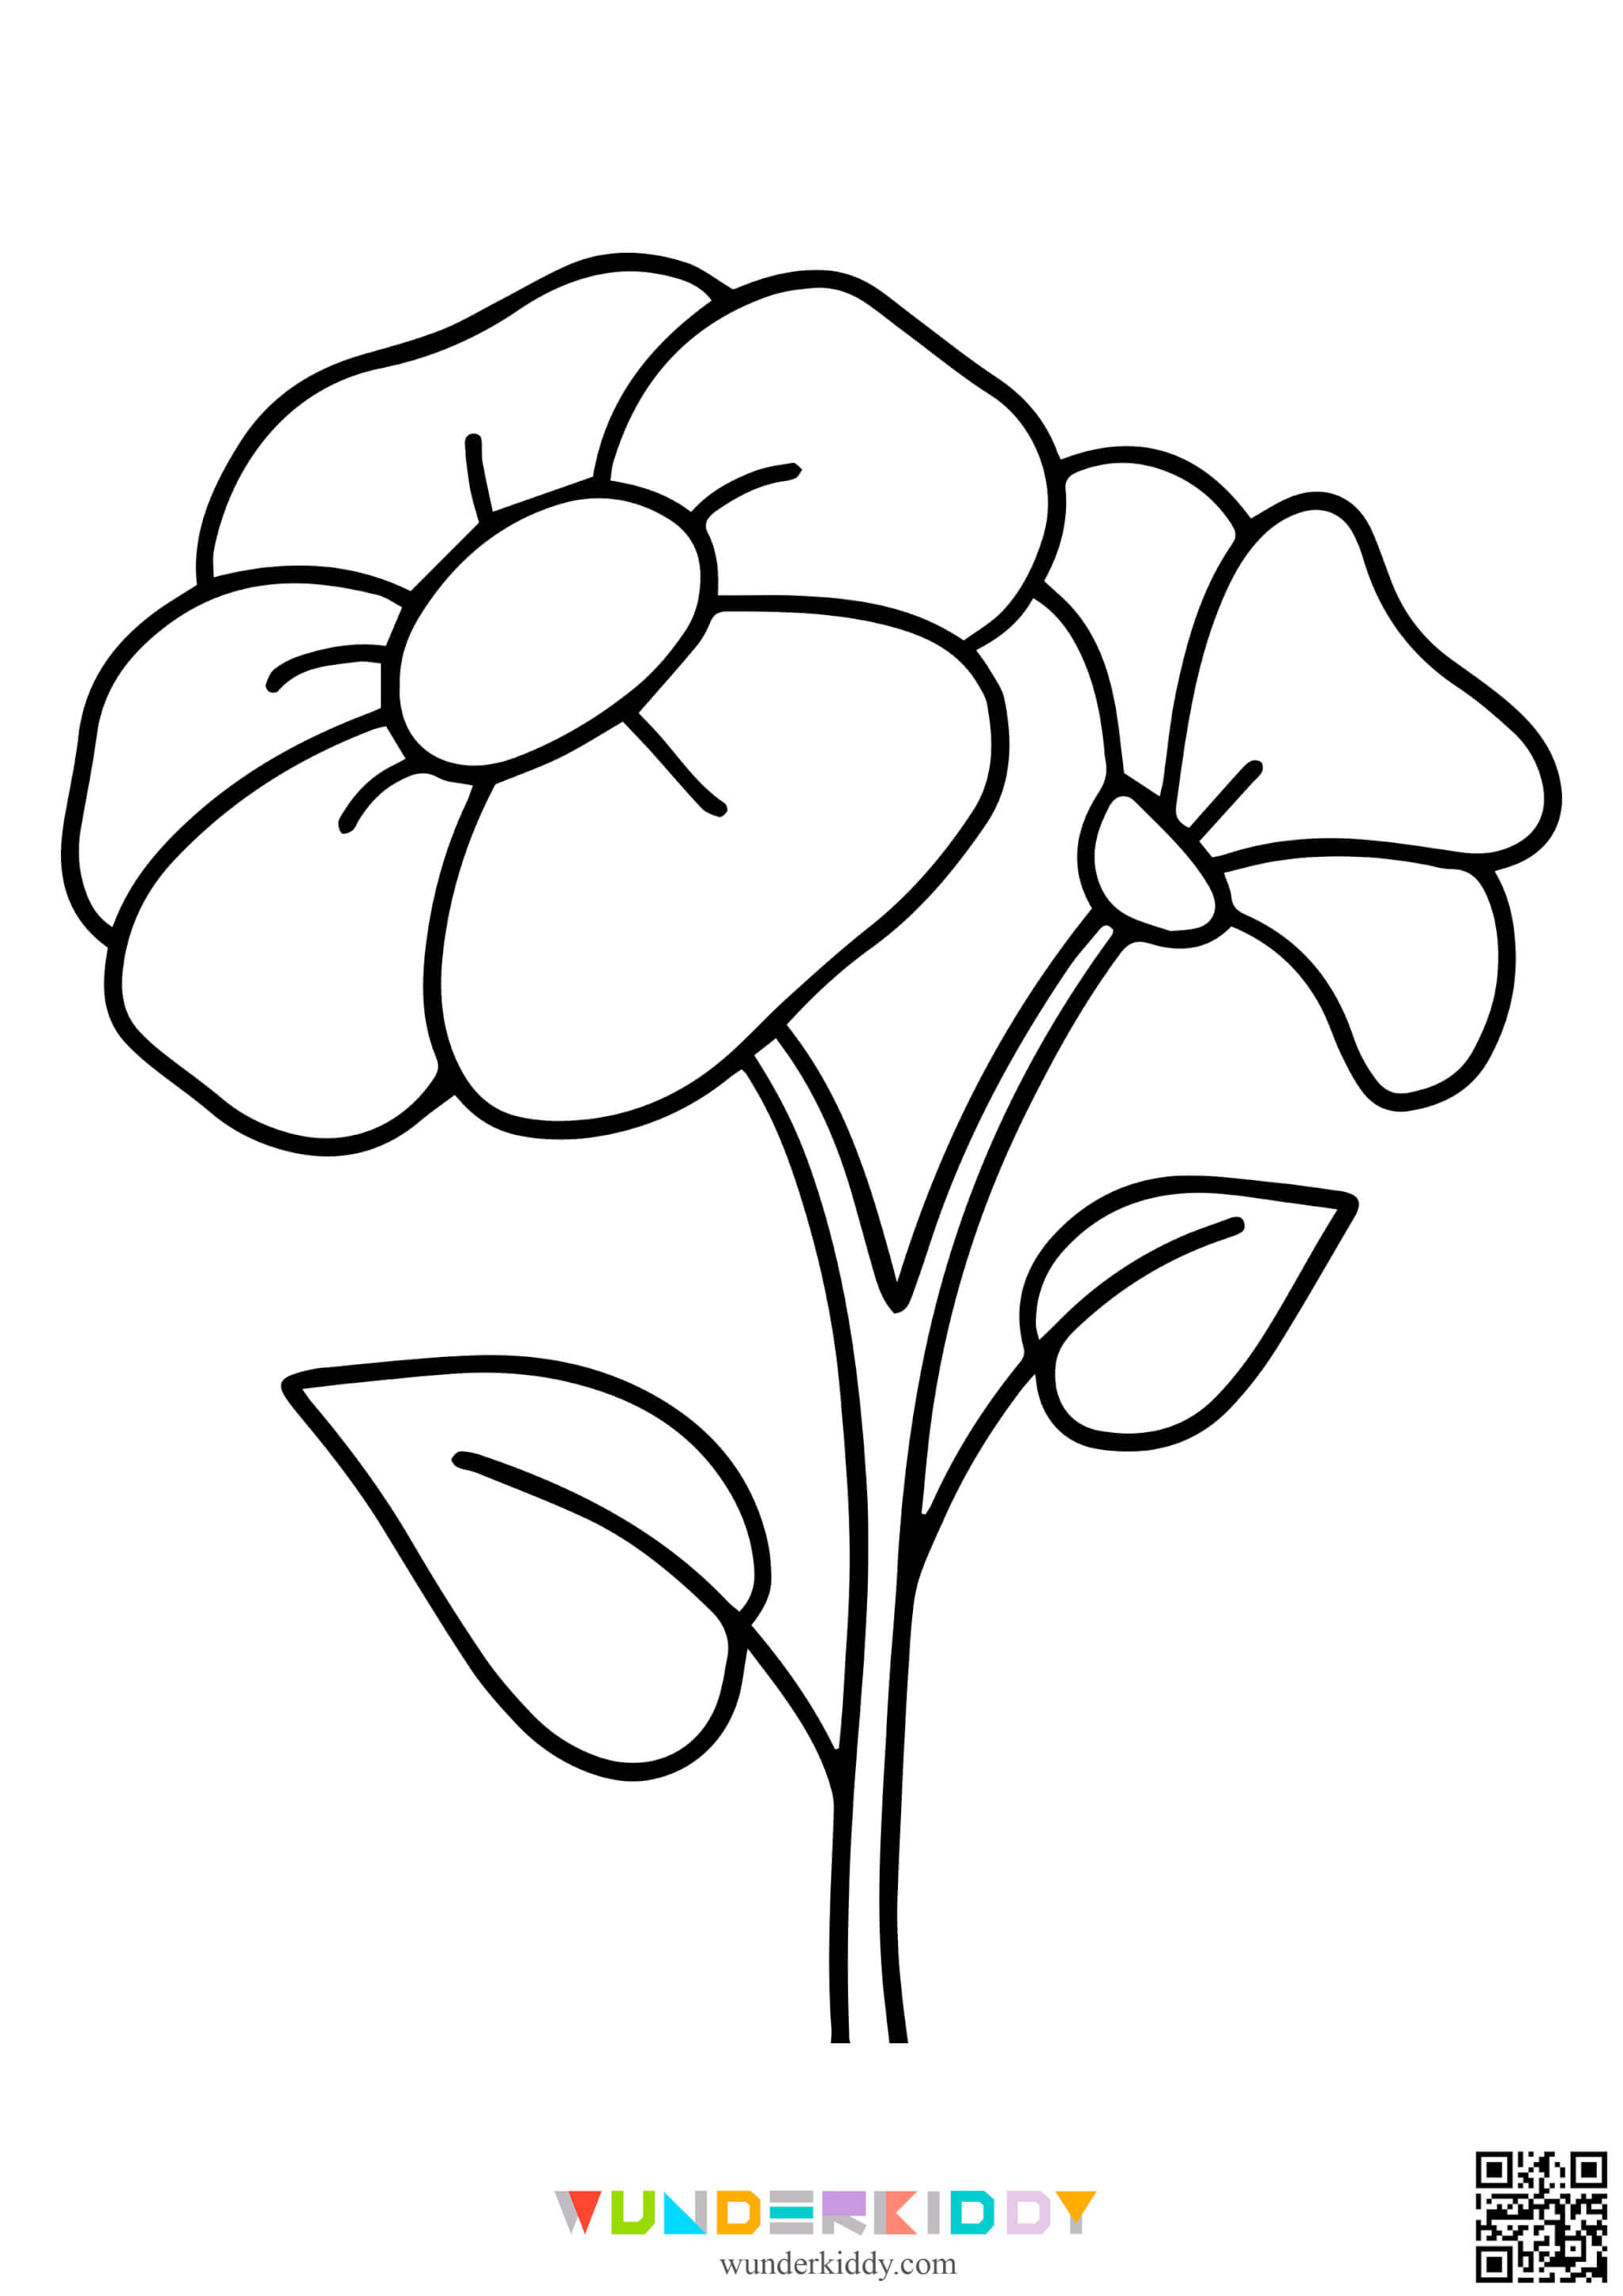 Spring Coloring Pages - Image 9